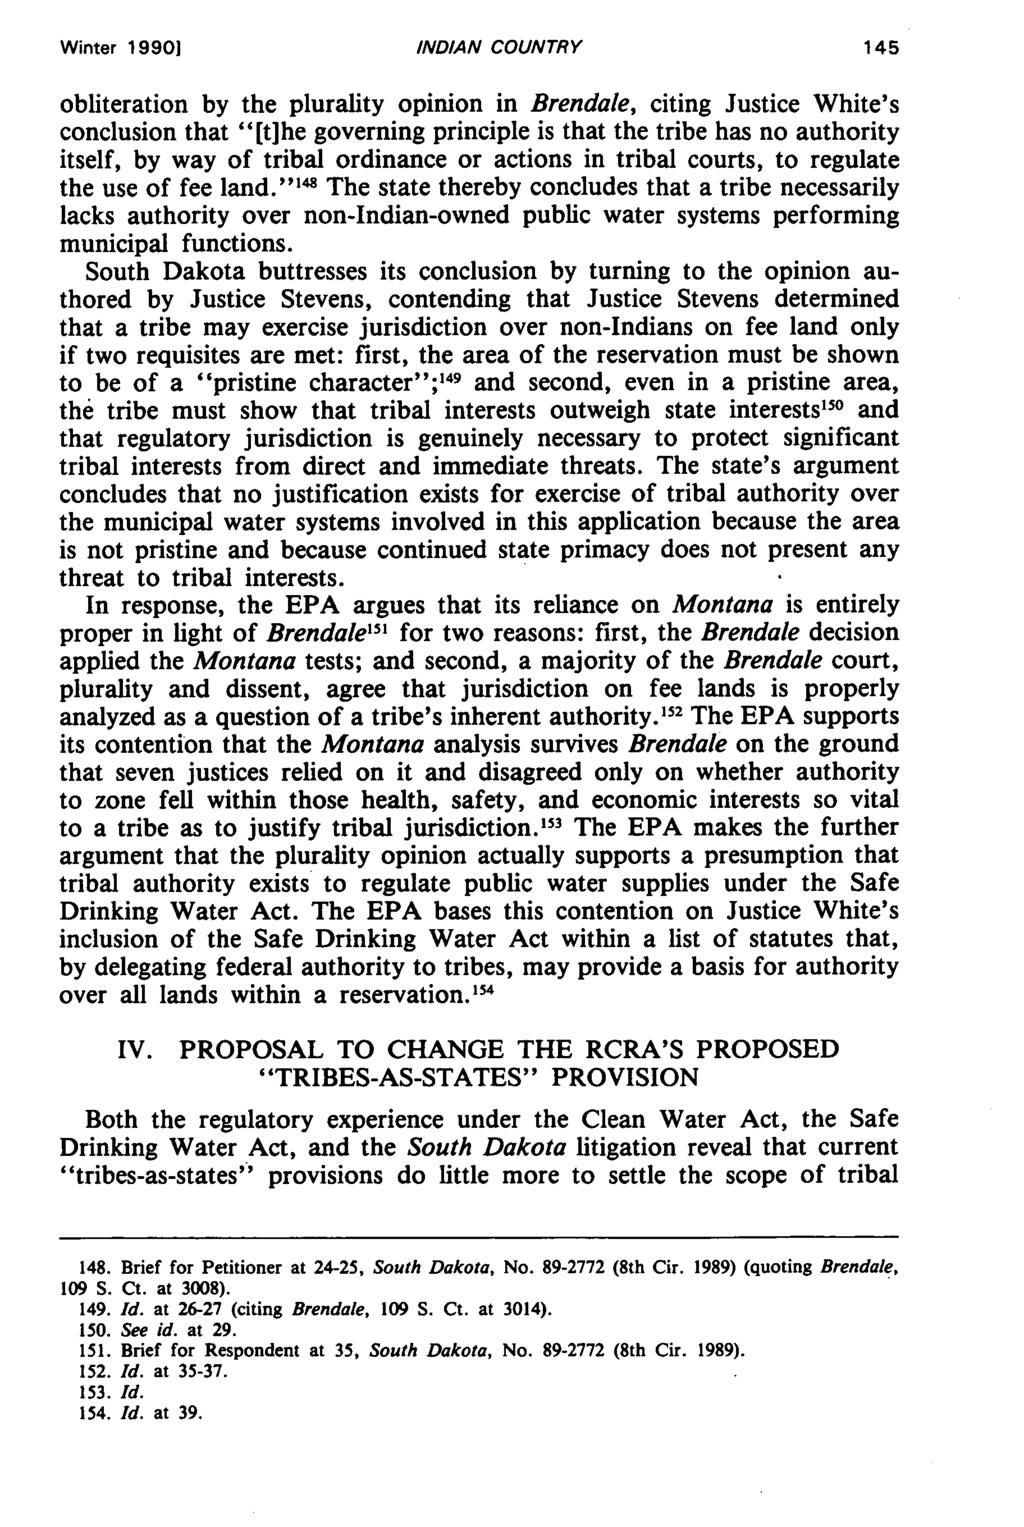 Winter 1990) INDIAN COUNTRY obliteration by the plurality opinion in Brendale, citing Justice White's conclusion that "[t]he governing principle is that the tribe has no authority itself, by way of